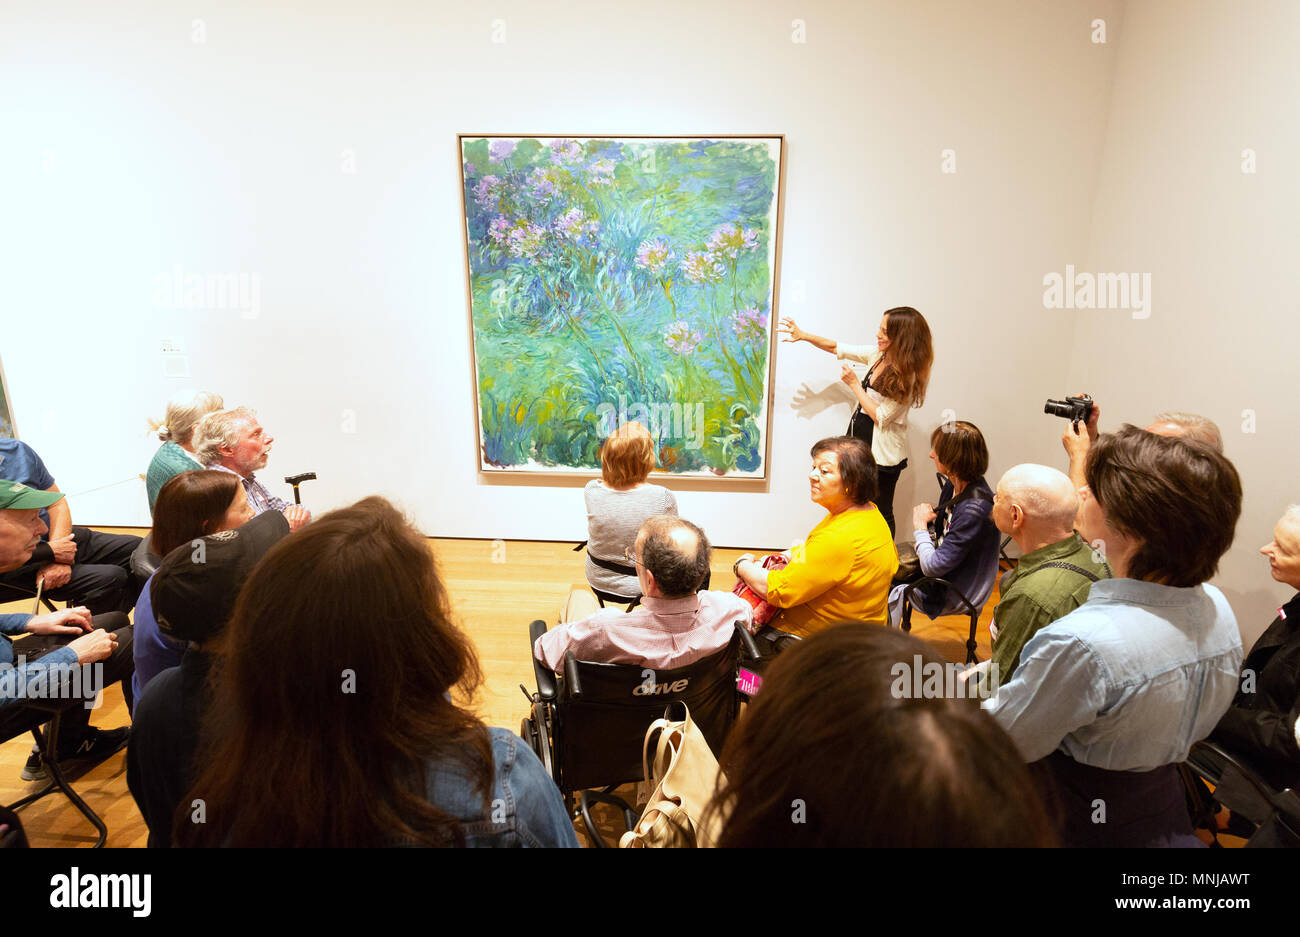 Visitors looking at a painting by Claude Monet, Agapanthus, Museum of Modern Art ( MoMA ), New York city USA Stock Photo